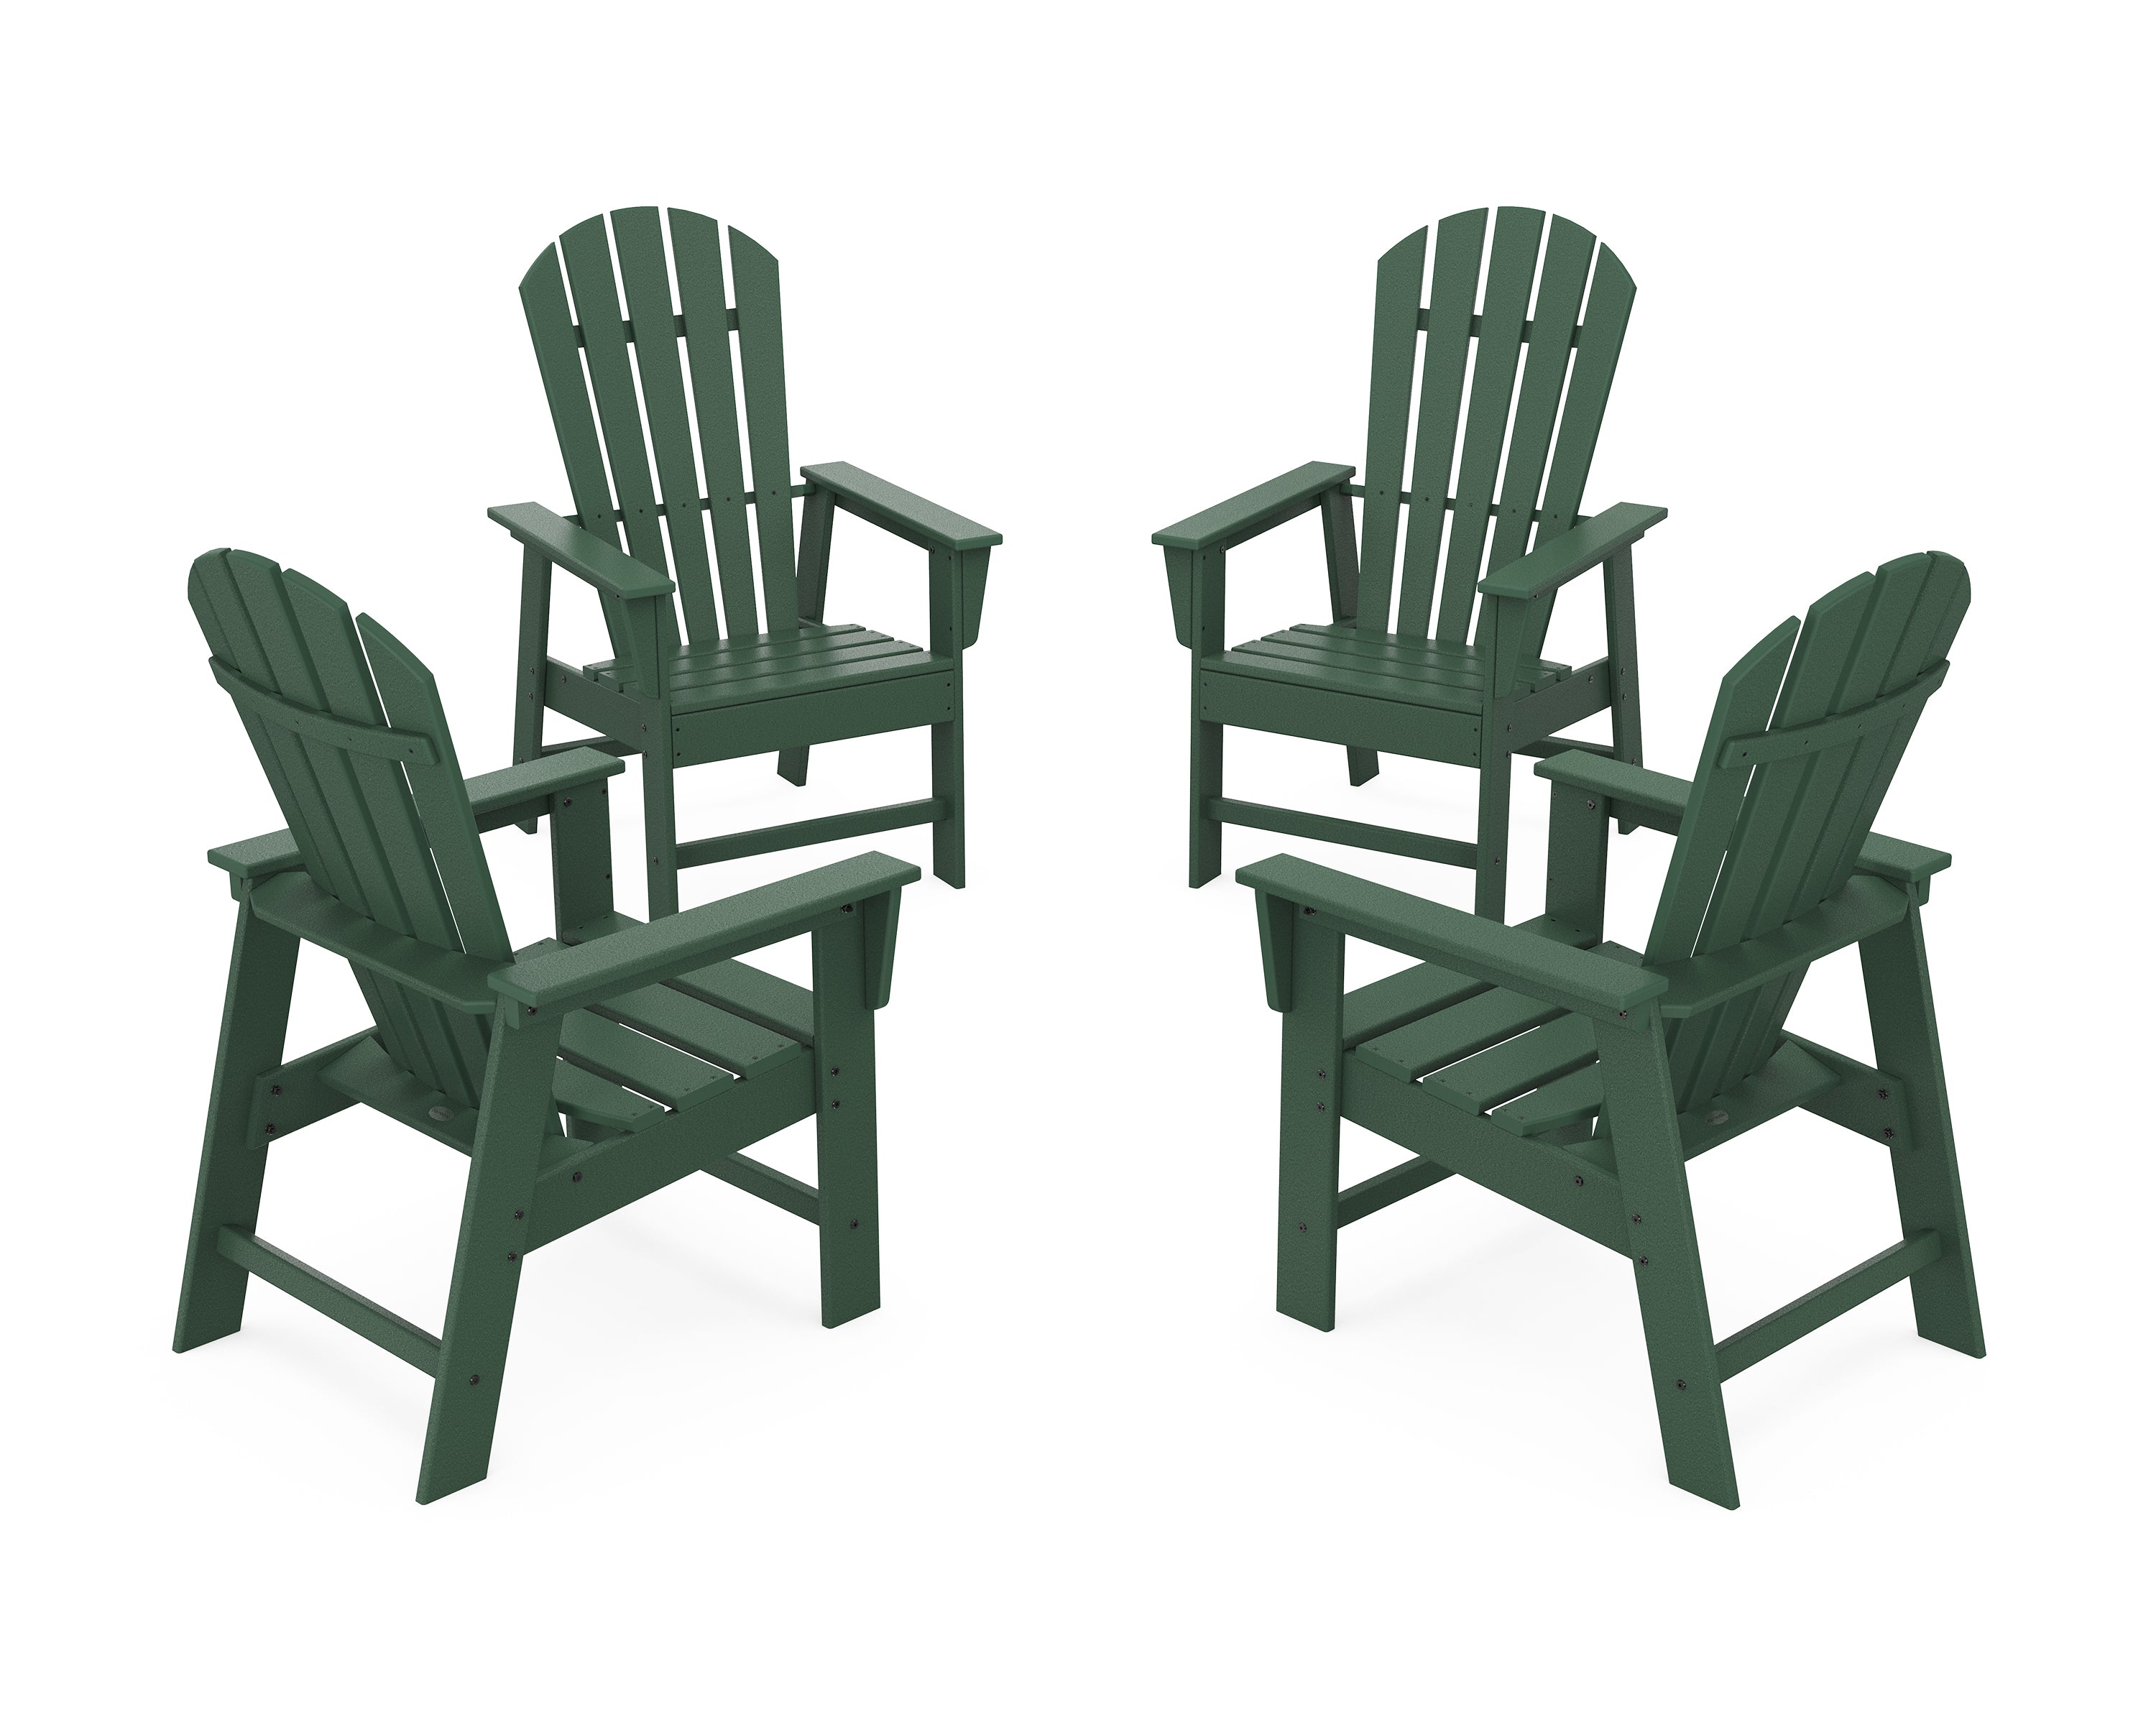 POLYWOOD® 4-Piece South Beach Casual Chair Conversation Set in Green